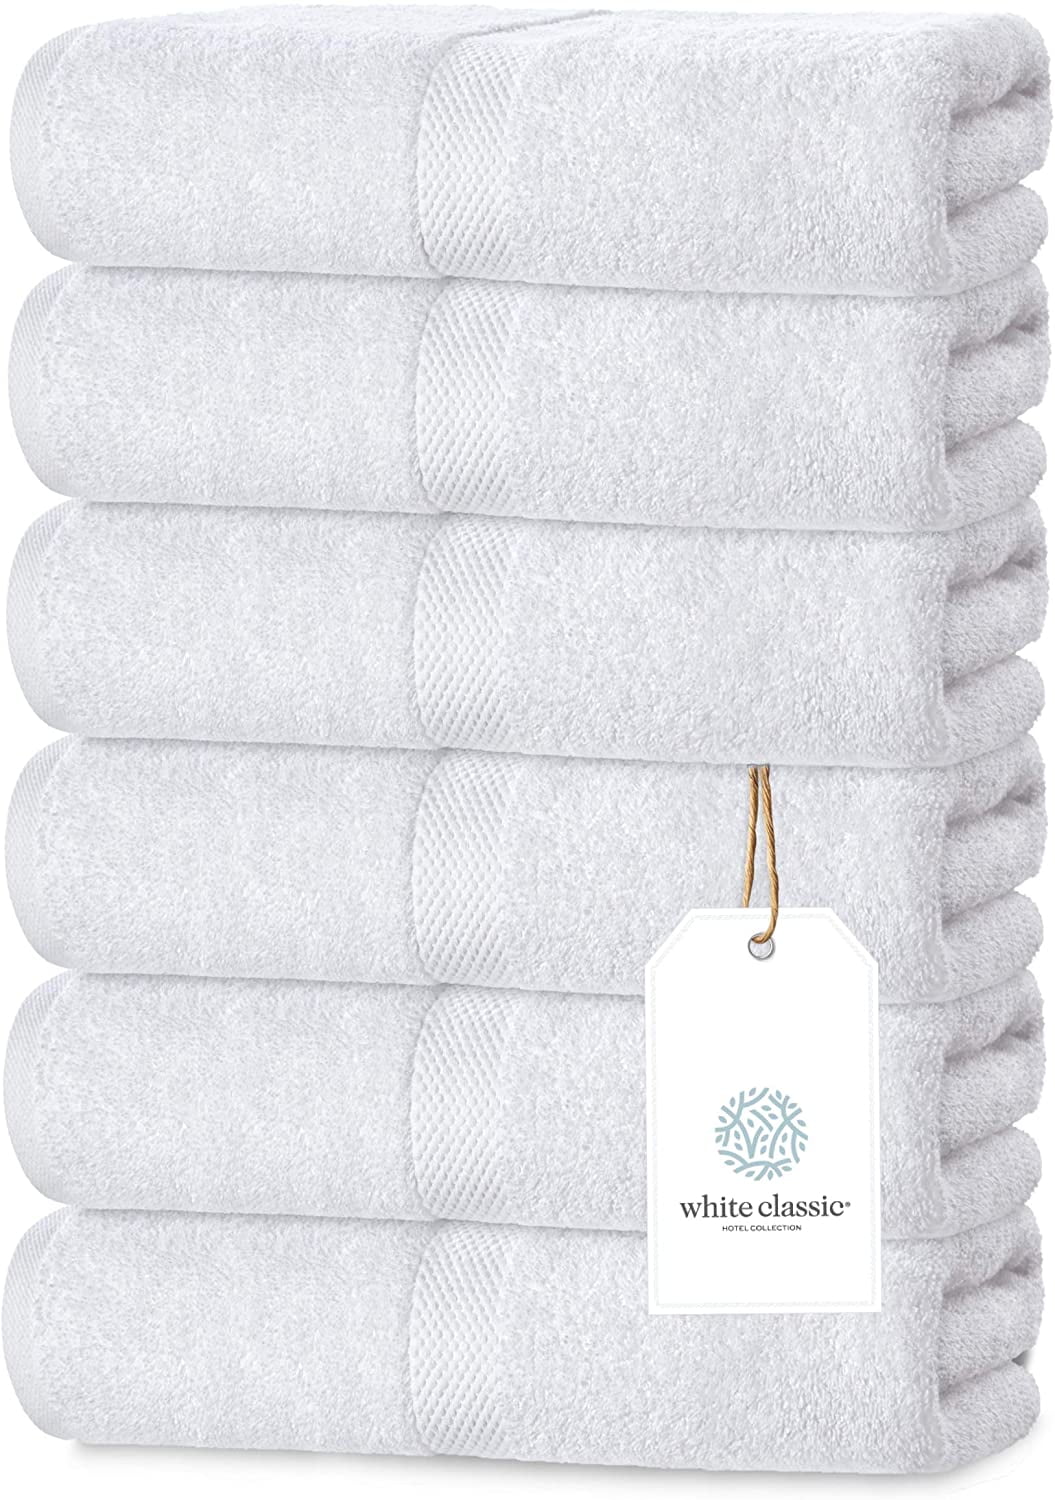 Soft Cotton Absorbent Hotel towel 6-Pack Luxury White Hand Towels 